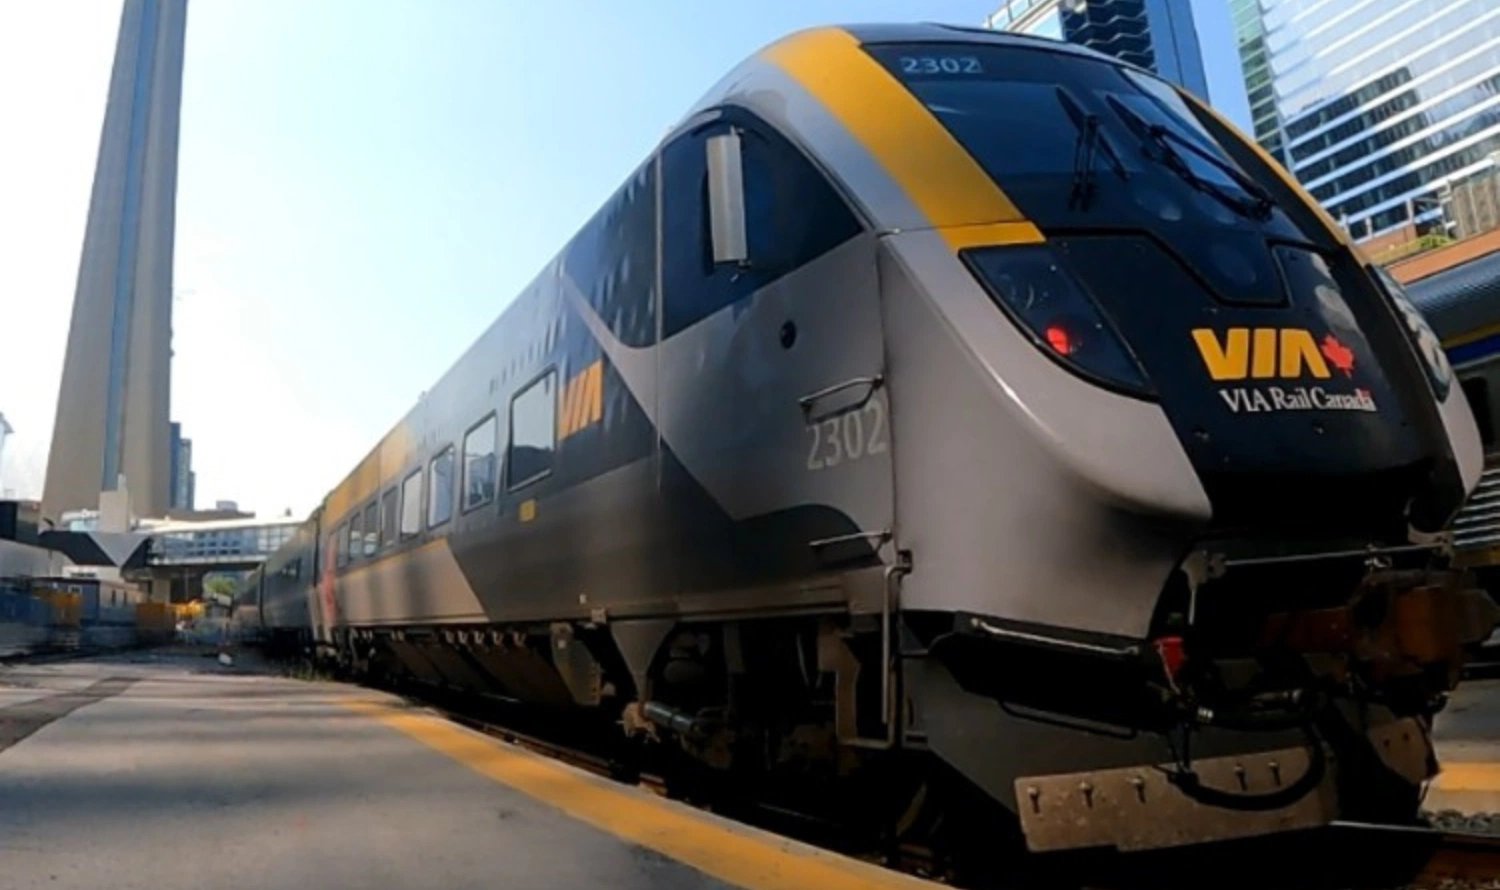 One of VIA Rail Canada's trains carrying small business owners across Canada